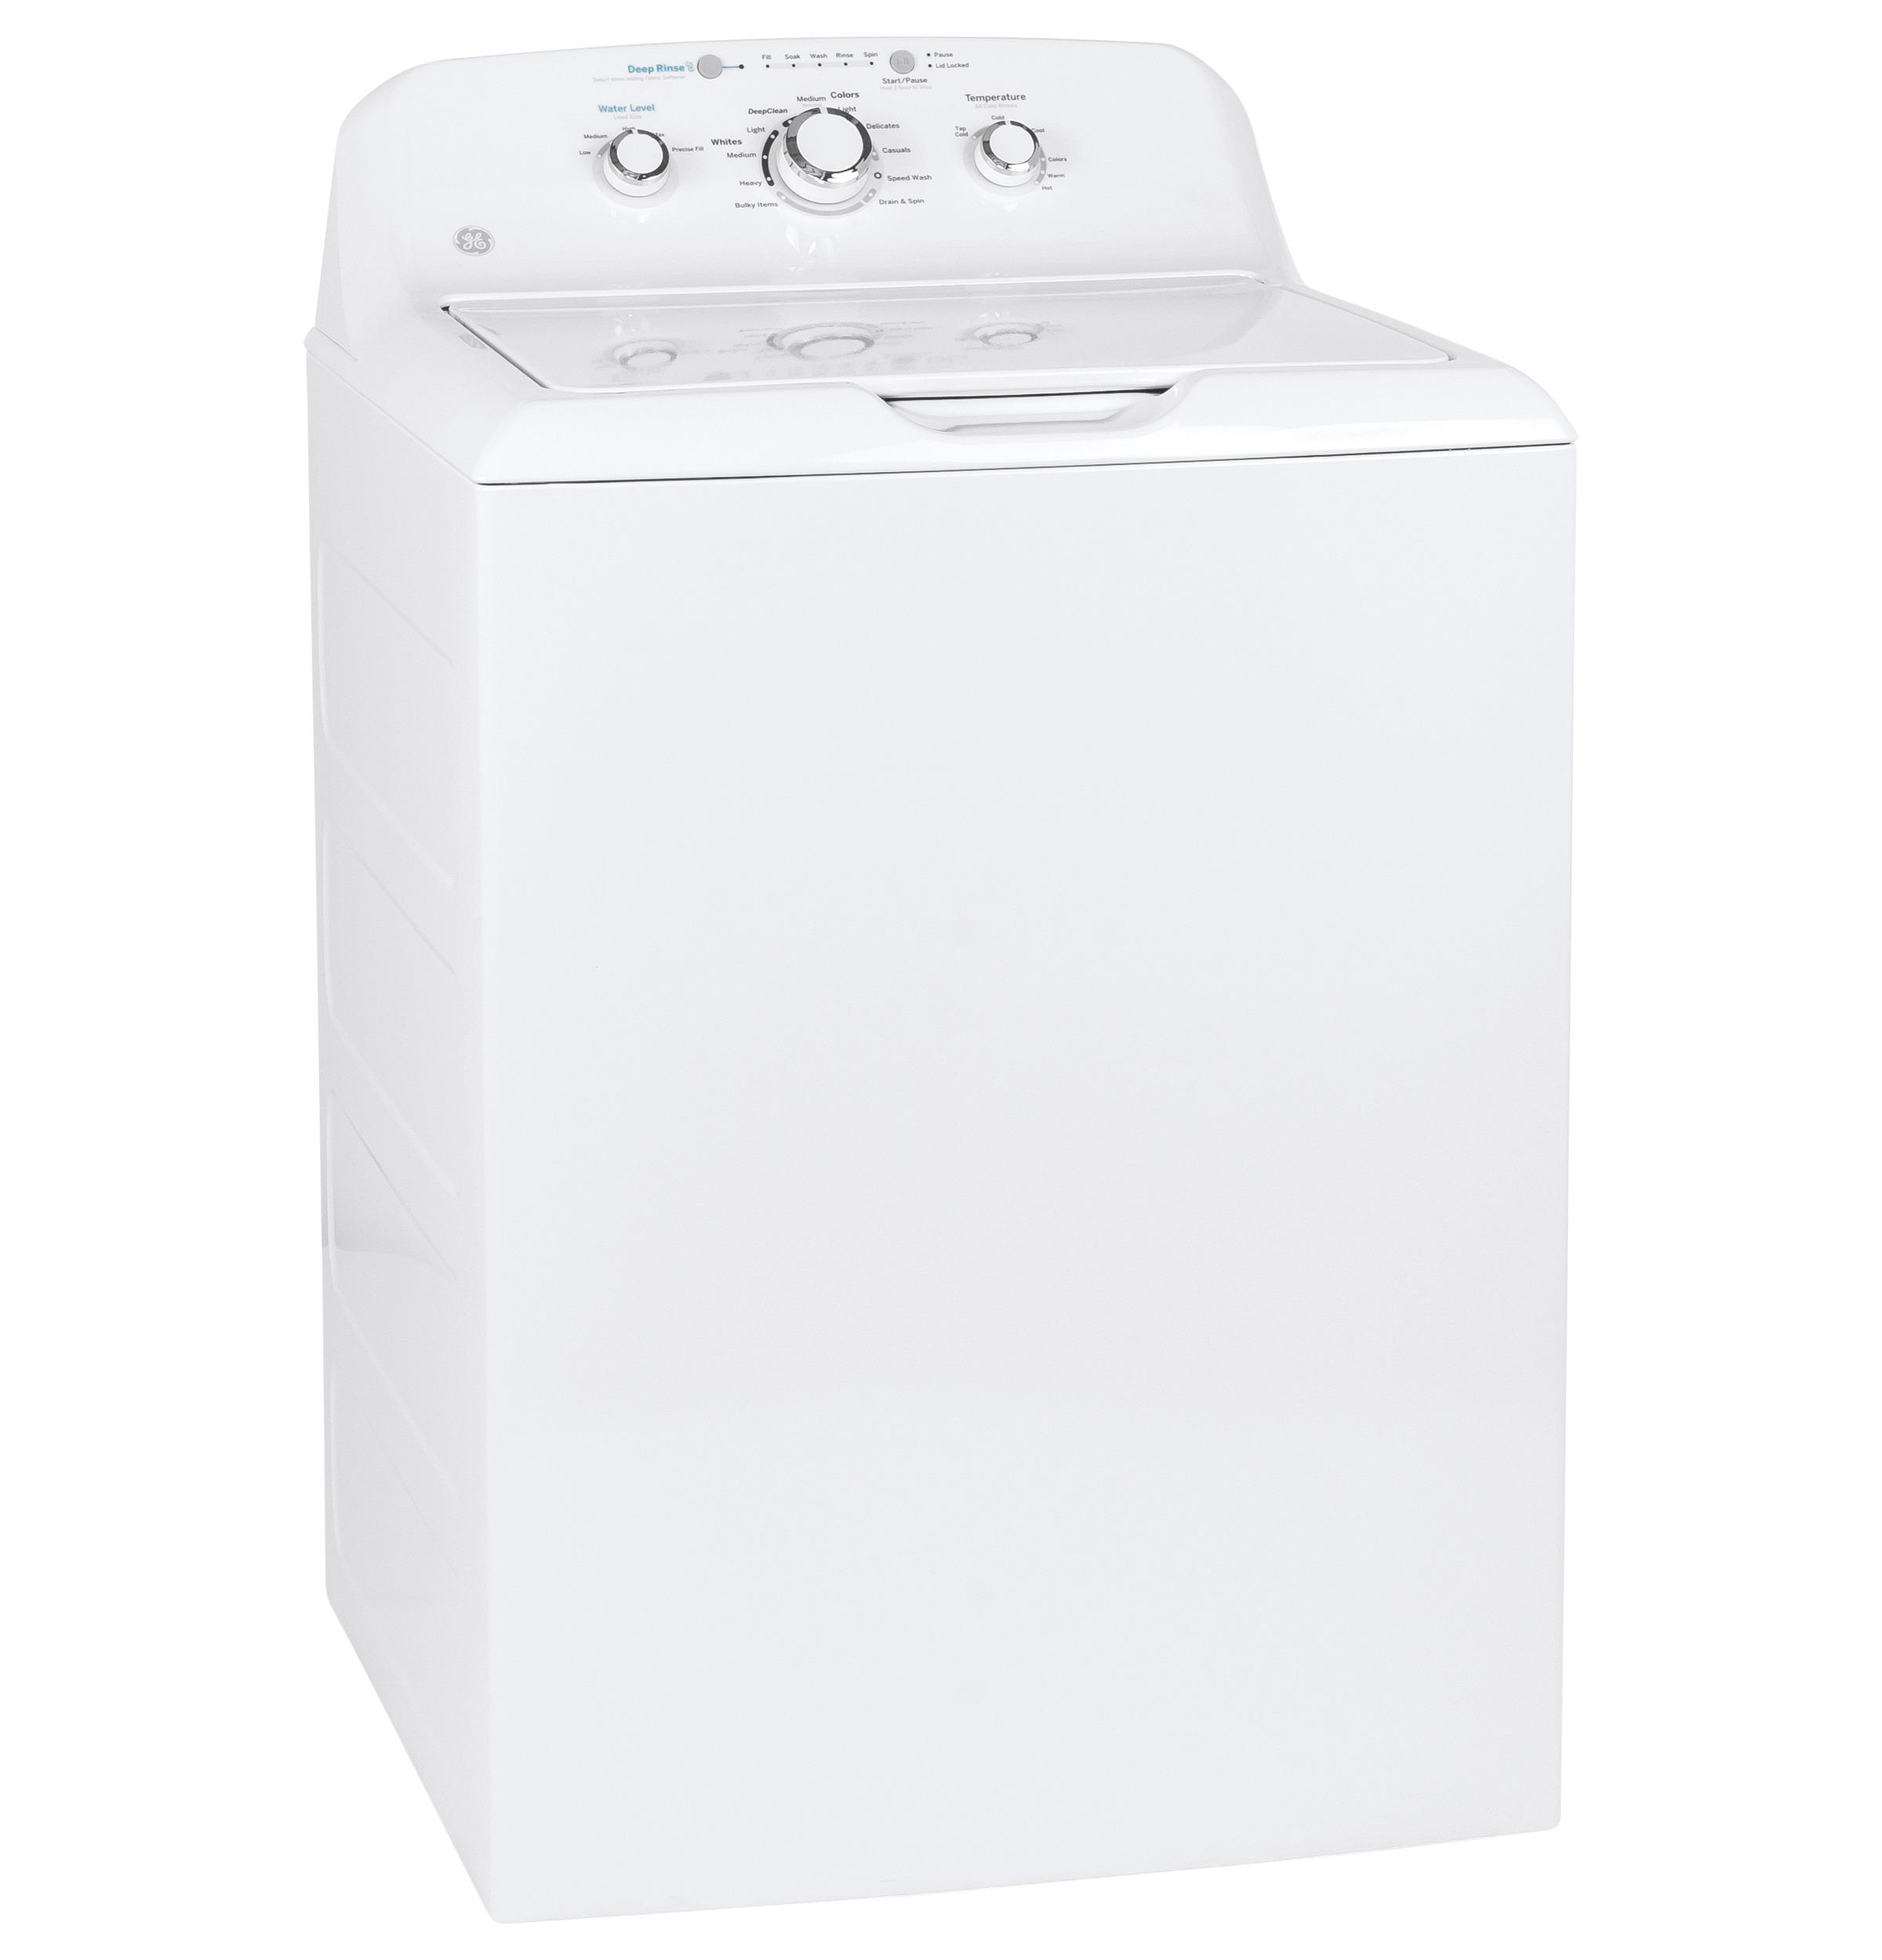 GE® Appliances 4.2 cu. ft. Capacity Washer Top Load with Stainless Steel Basket model GTW335ASNWW - image 4 of 5